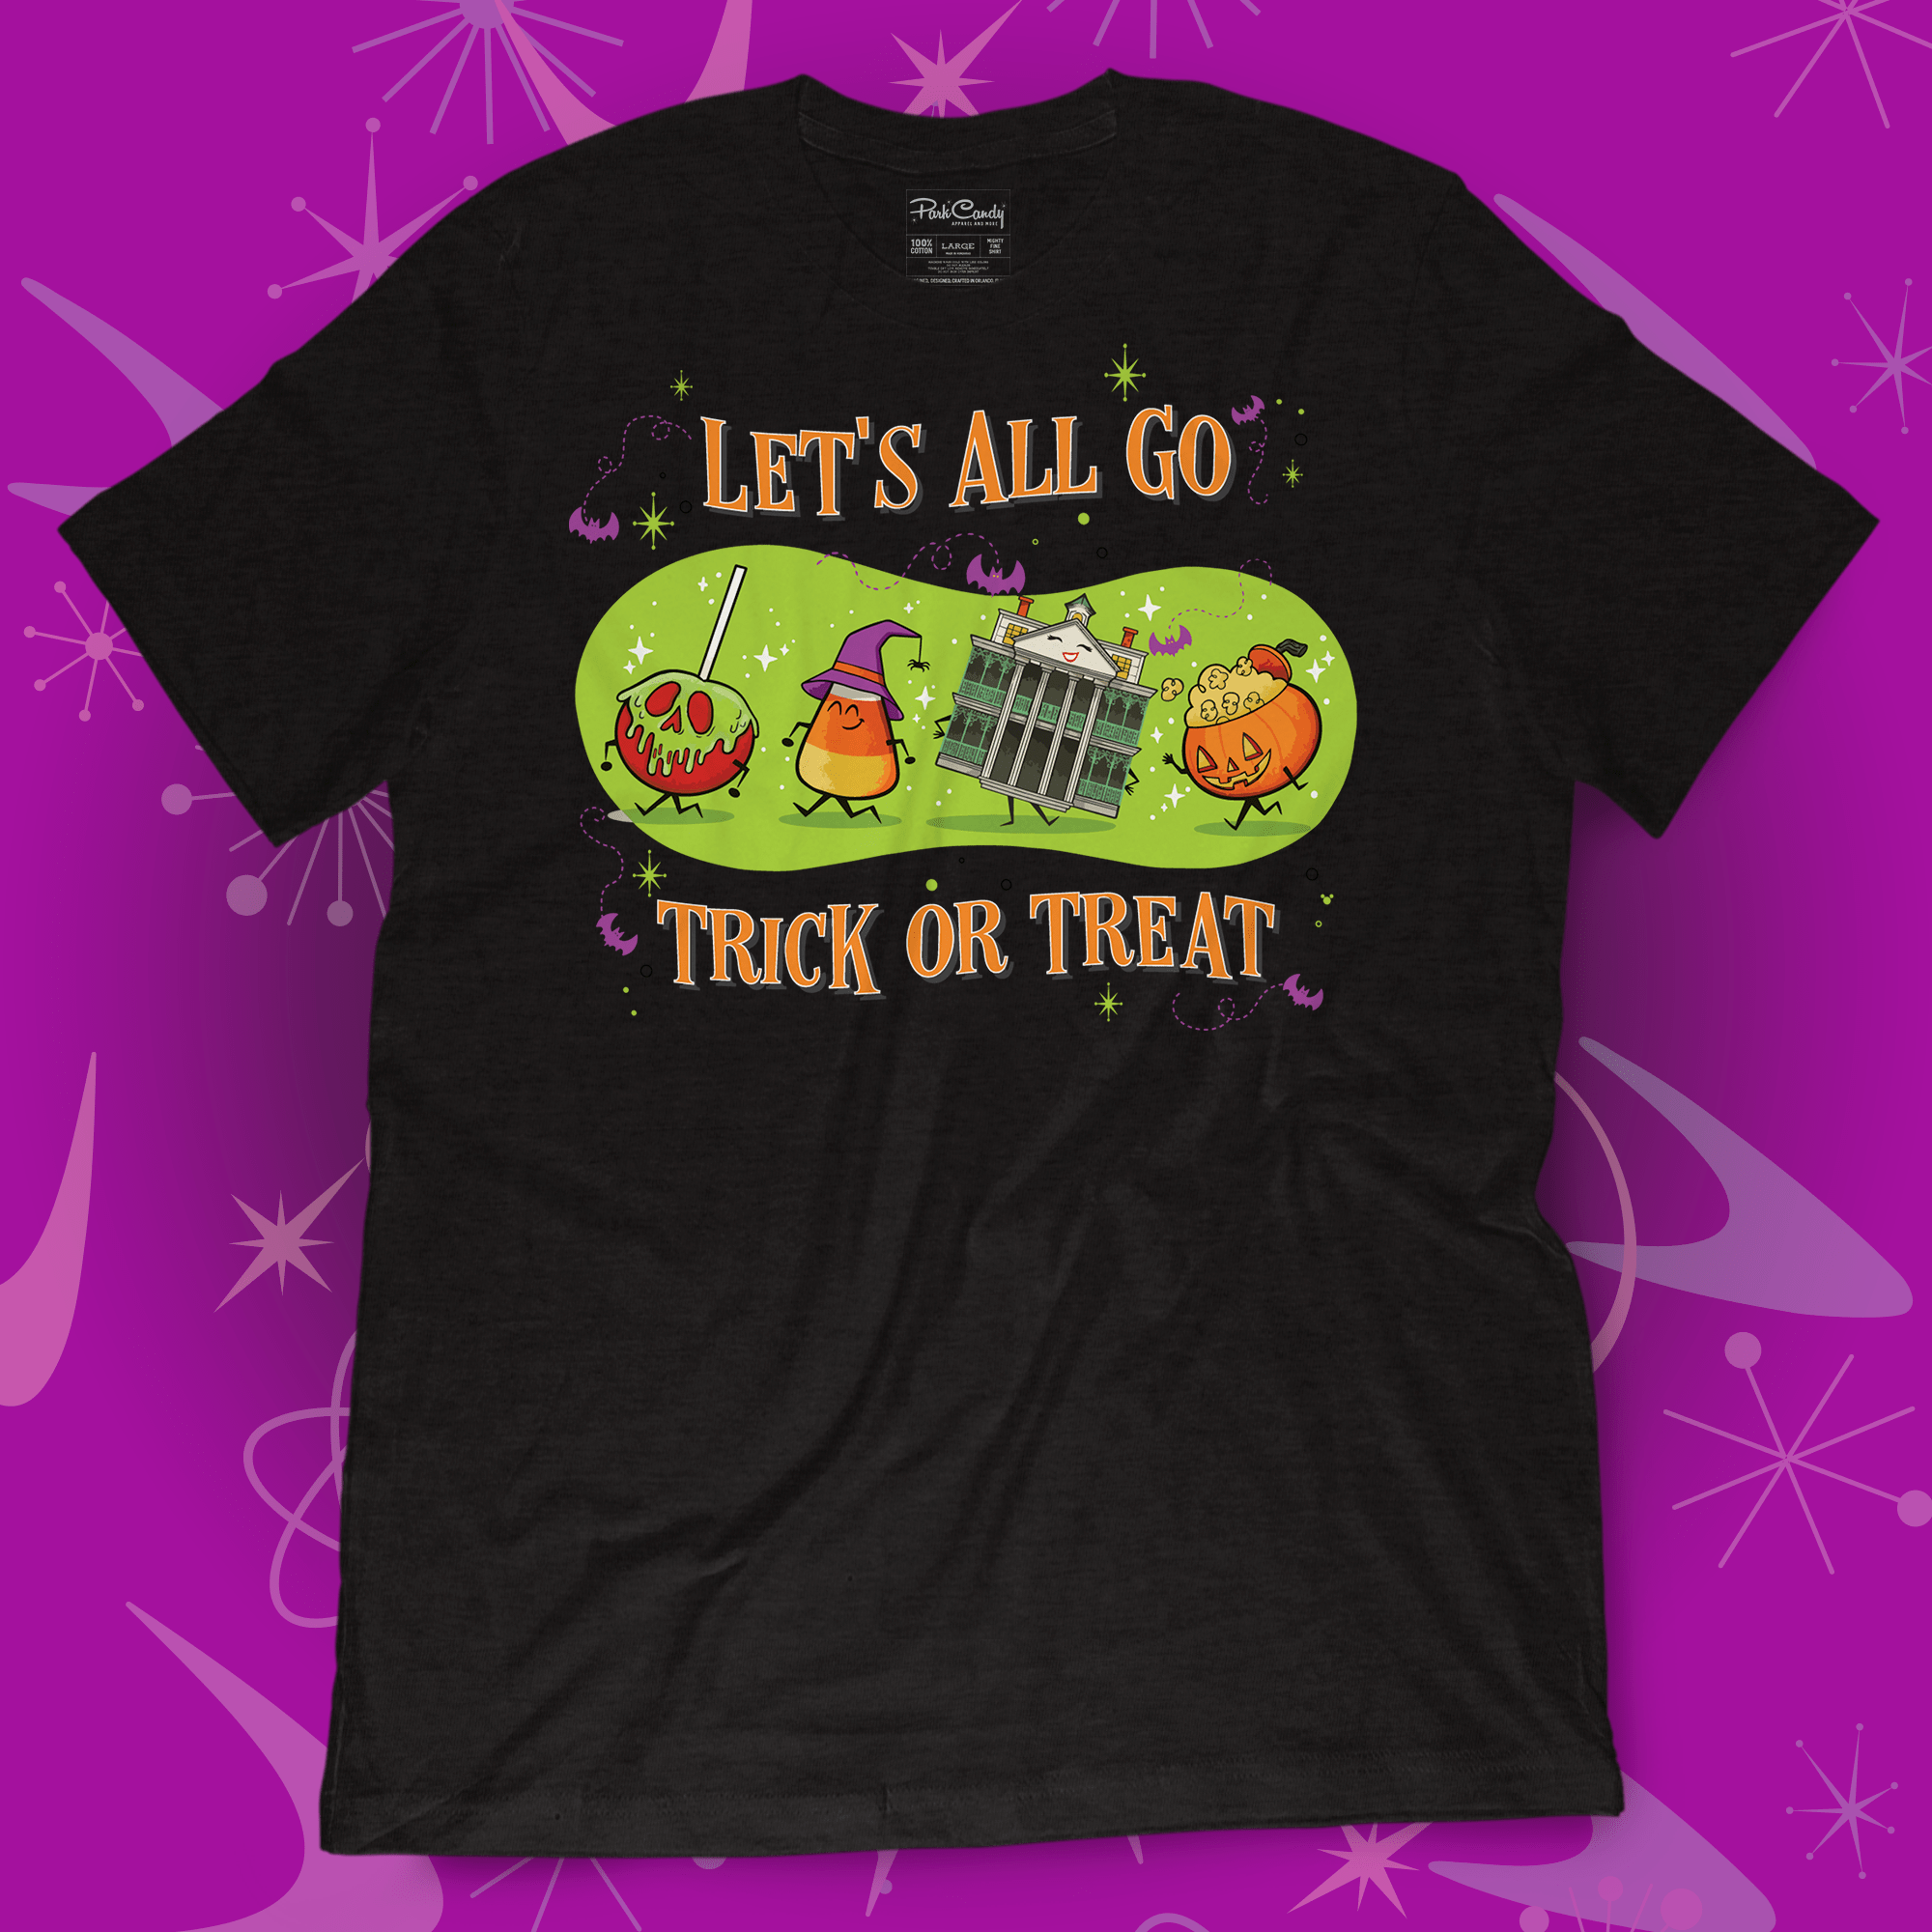 Let's All Go Trick or Treat Shirt - Park Candy